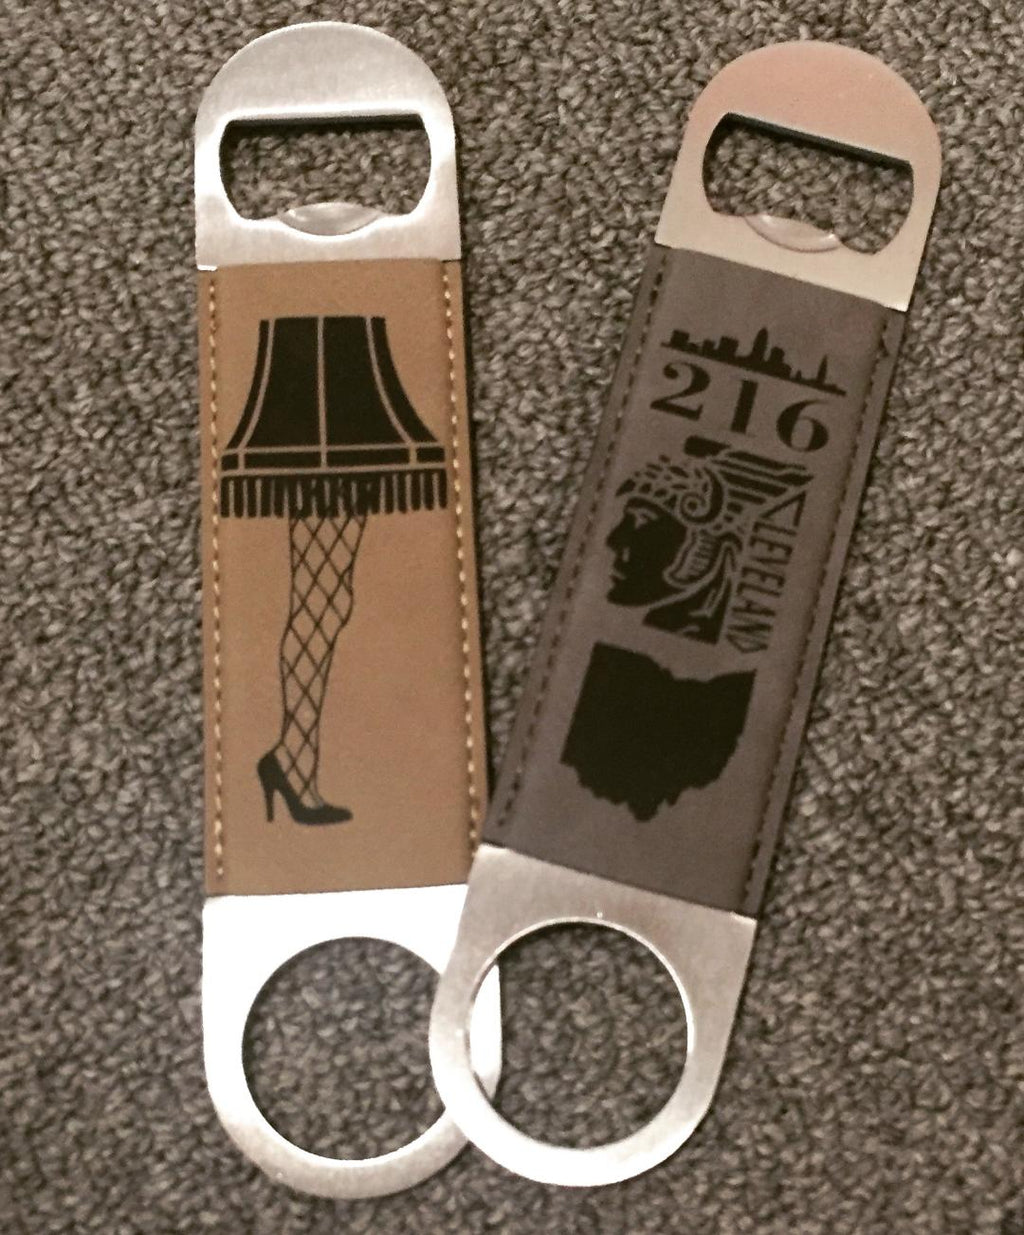 Cleveland Themed Bottle Openers